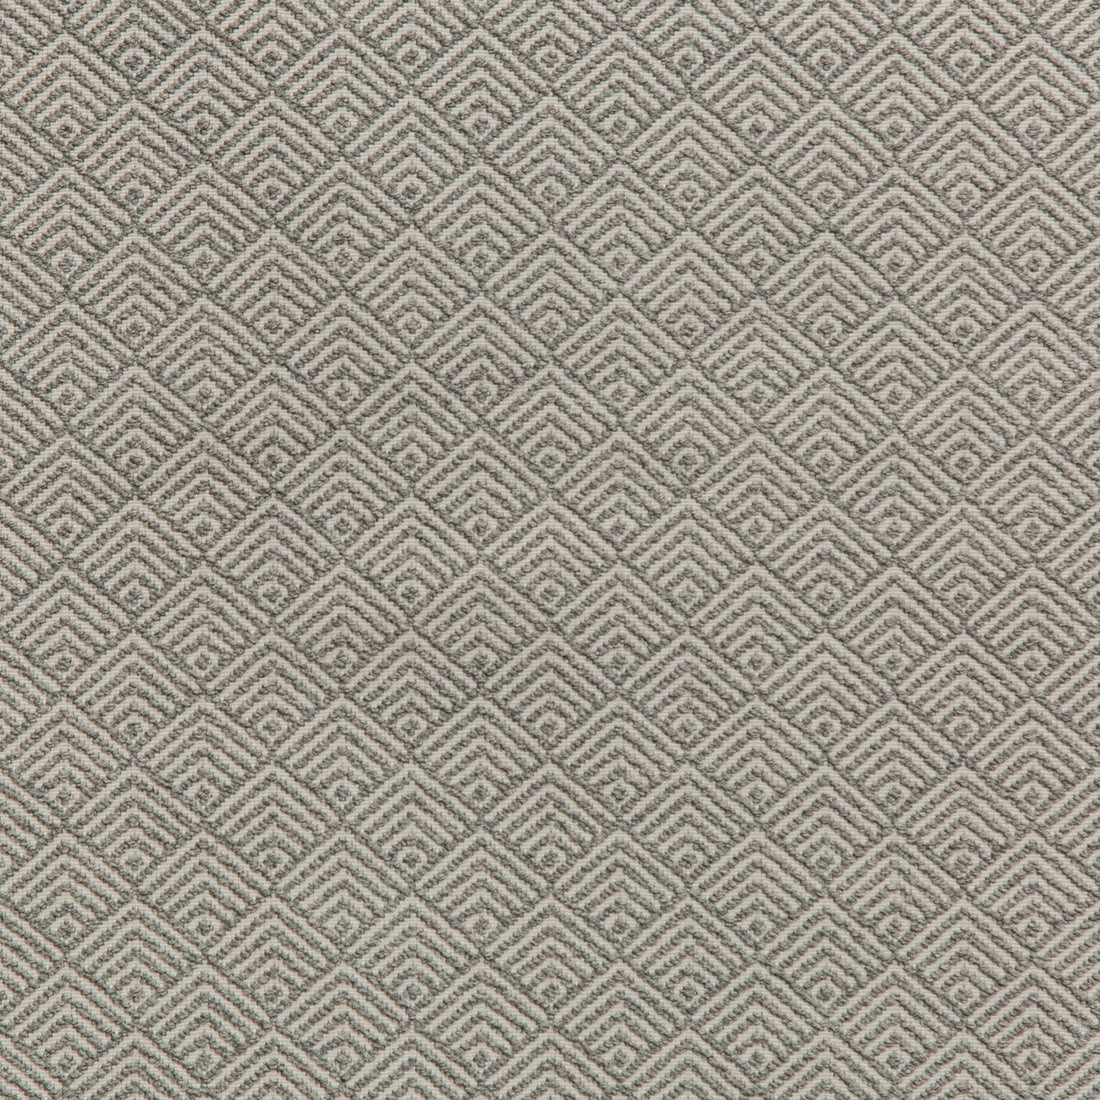 Bower fabric in stone color - pattern 35821.106.0 - by Kravet Design in the Indoor / Outdoor collection